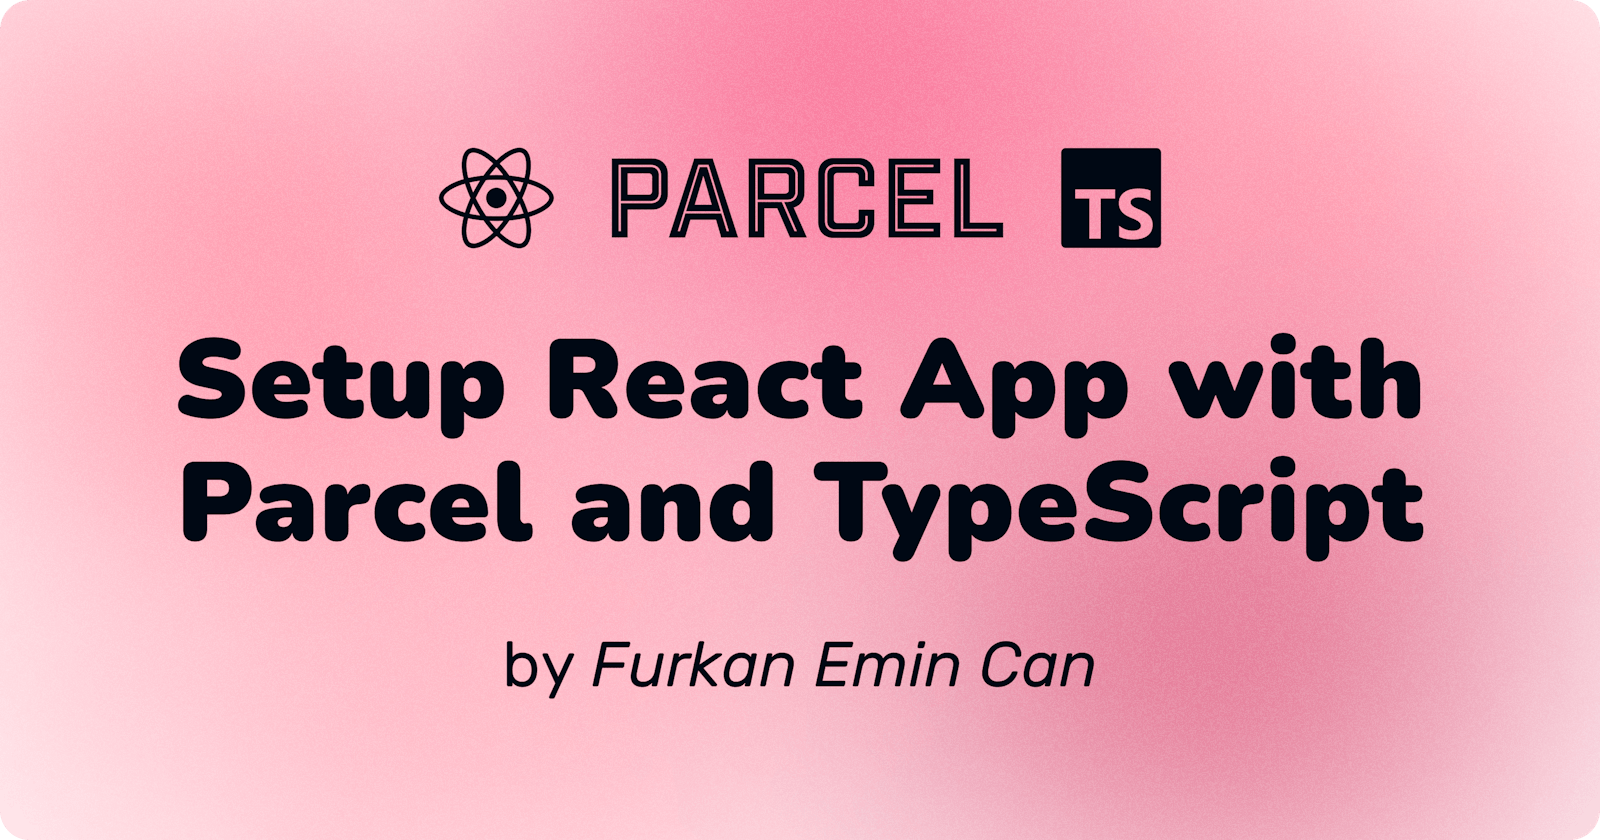 How to Setup React App with Parcel and TypeScript